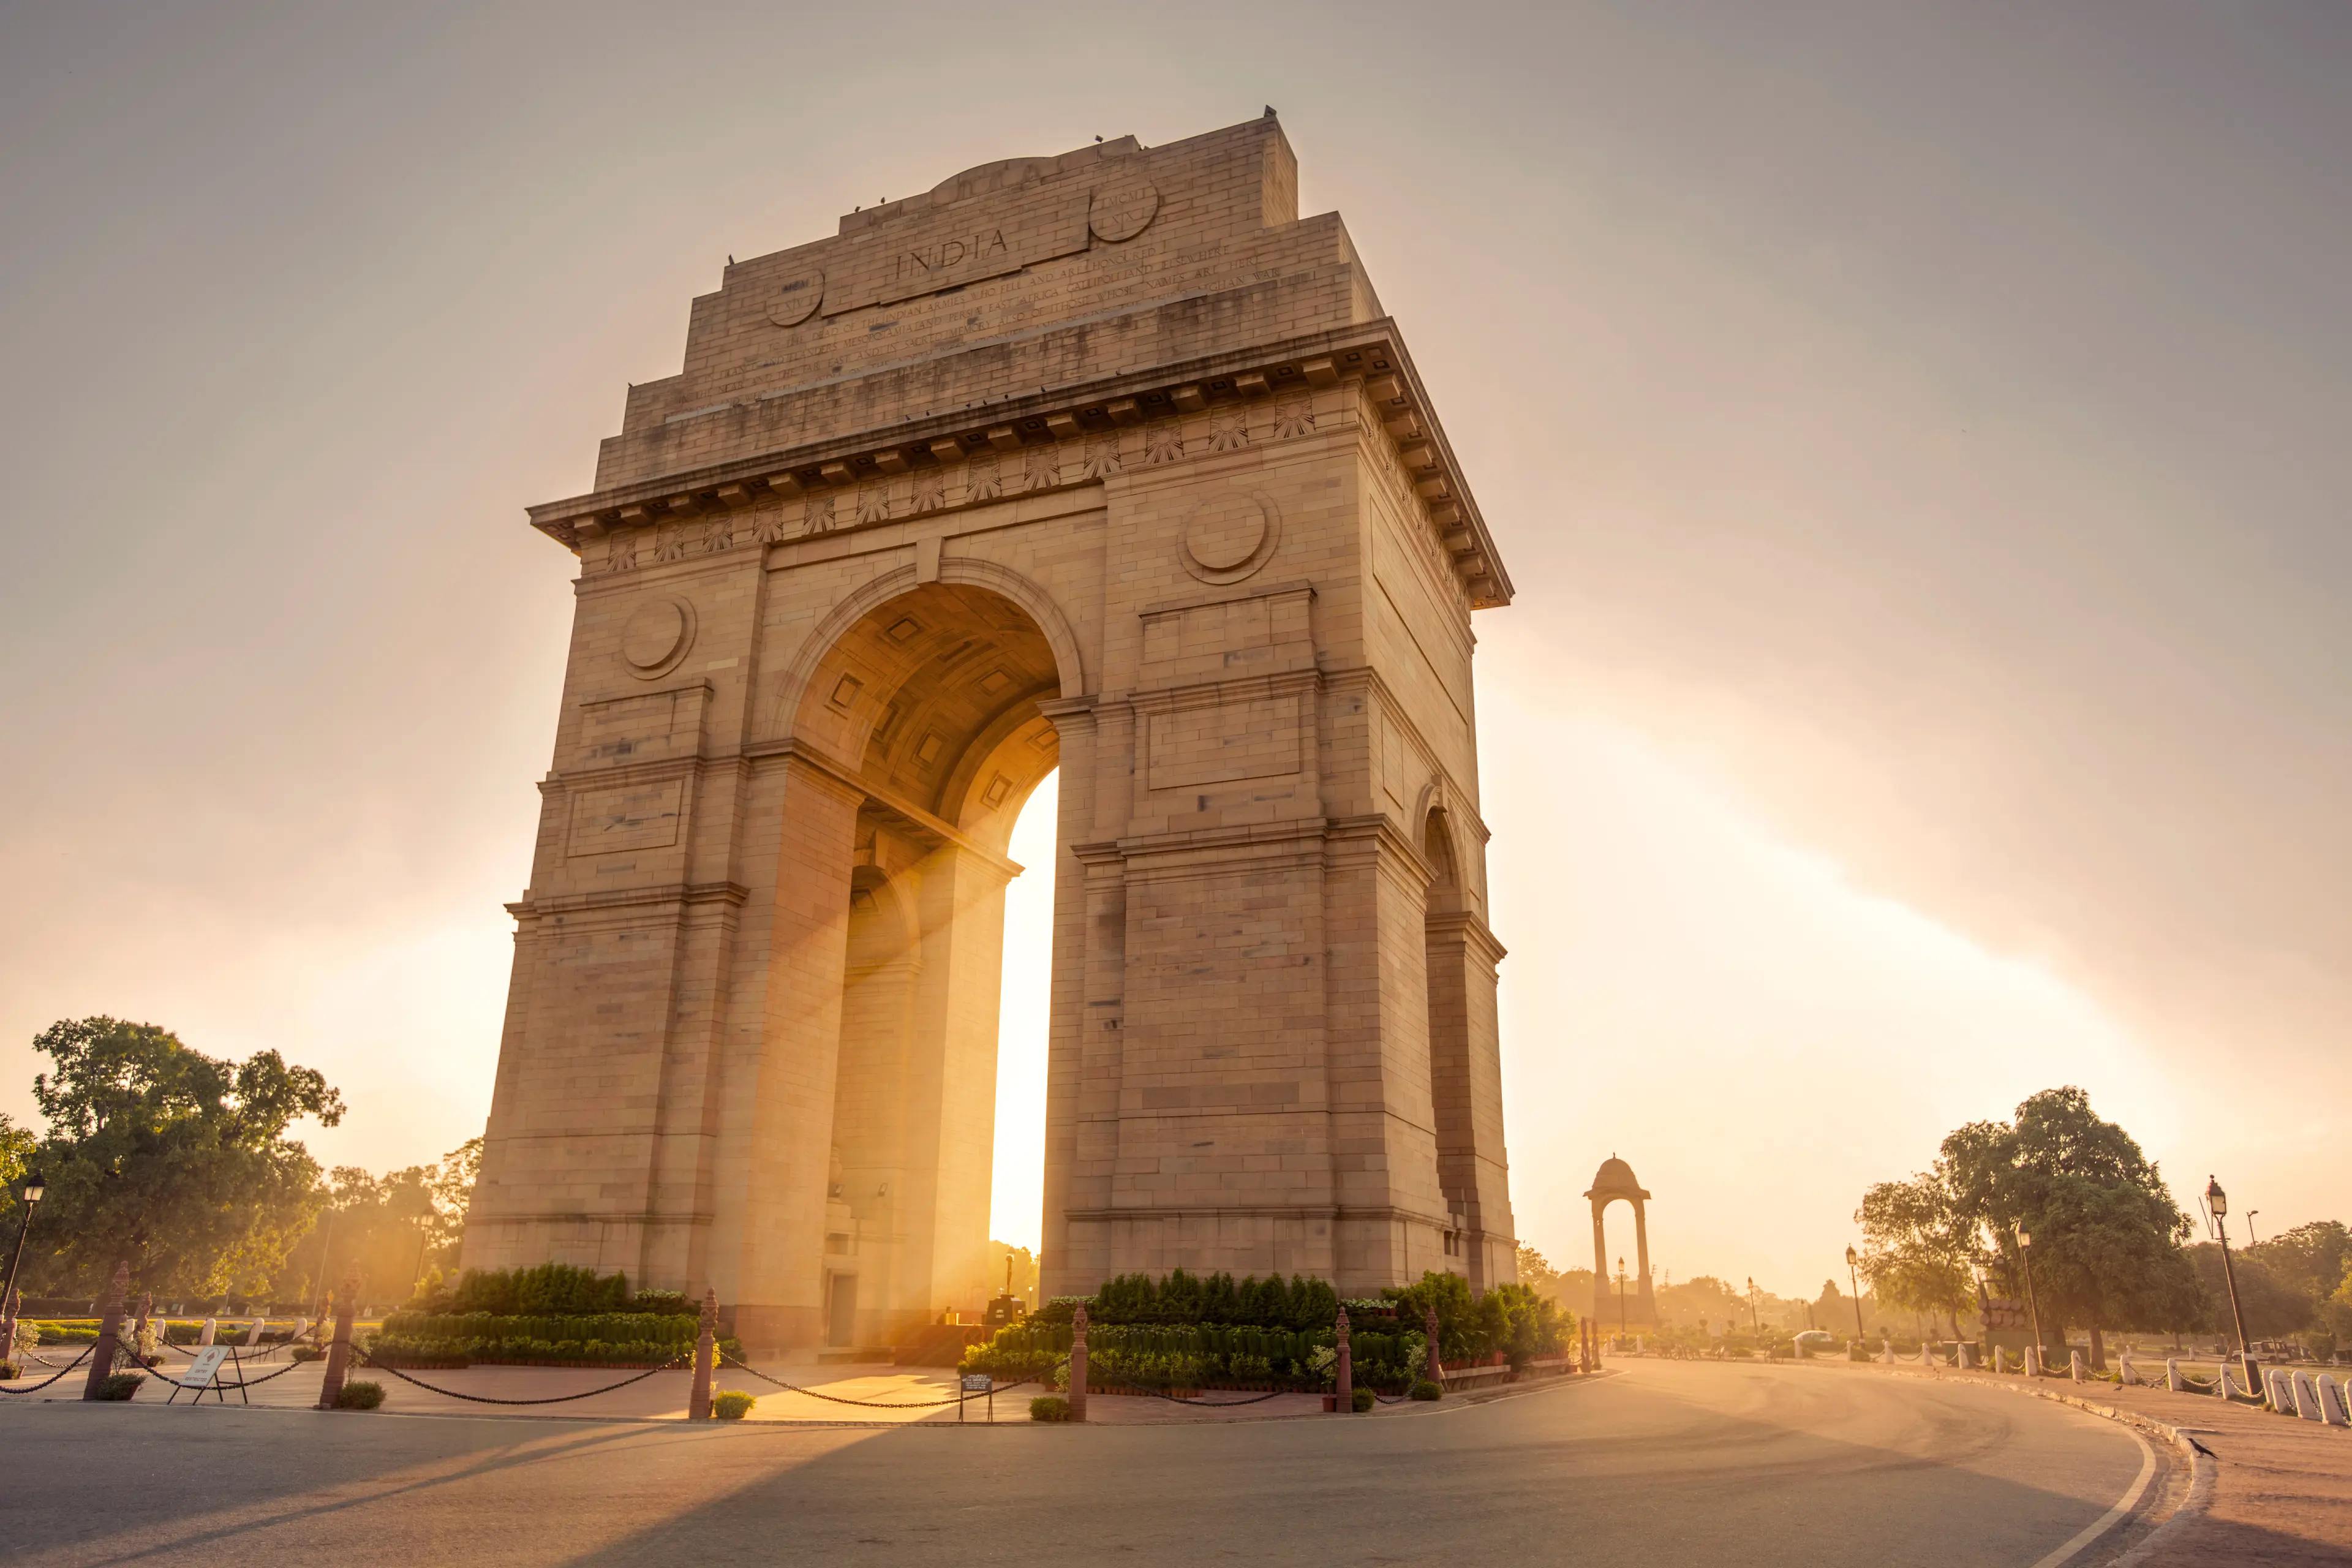 2-Day Delhi Locals' Guide: Food, Wine and Shopping with Friends